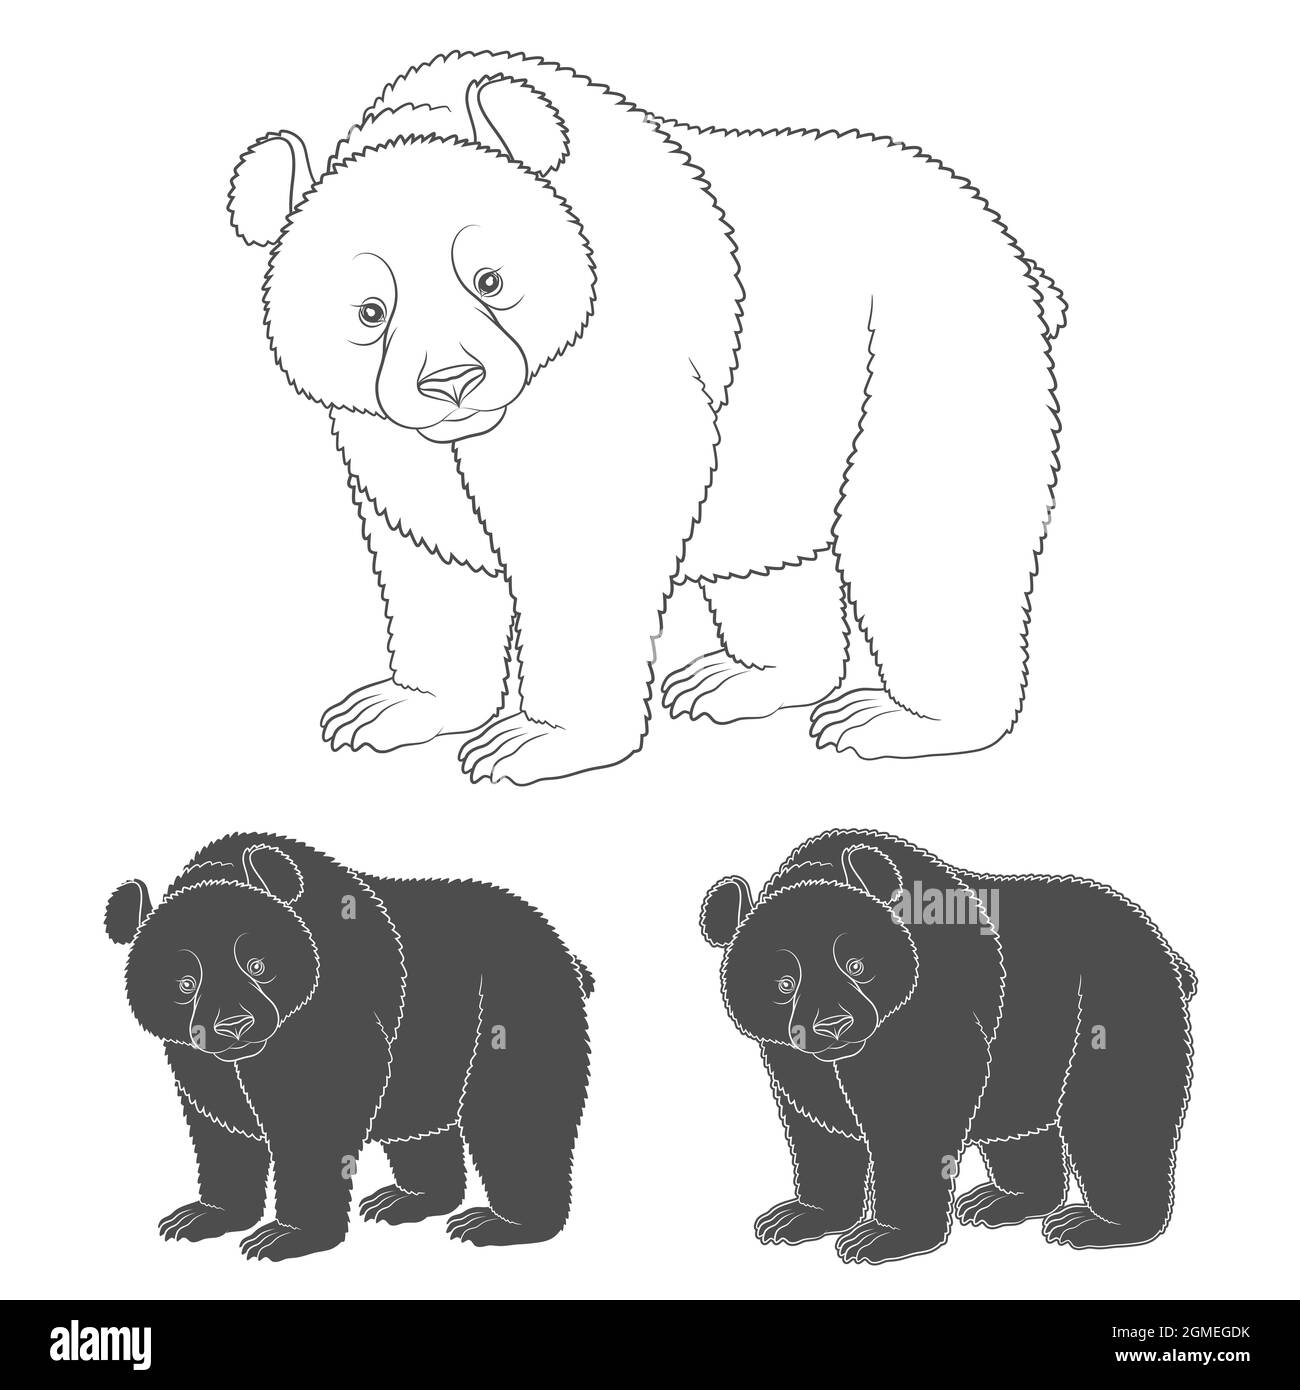 Set of black and white images with a bear. Isolated vector objects on white background. Stock Vector